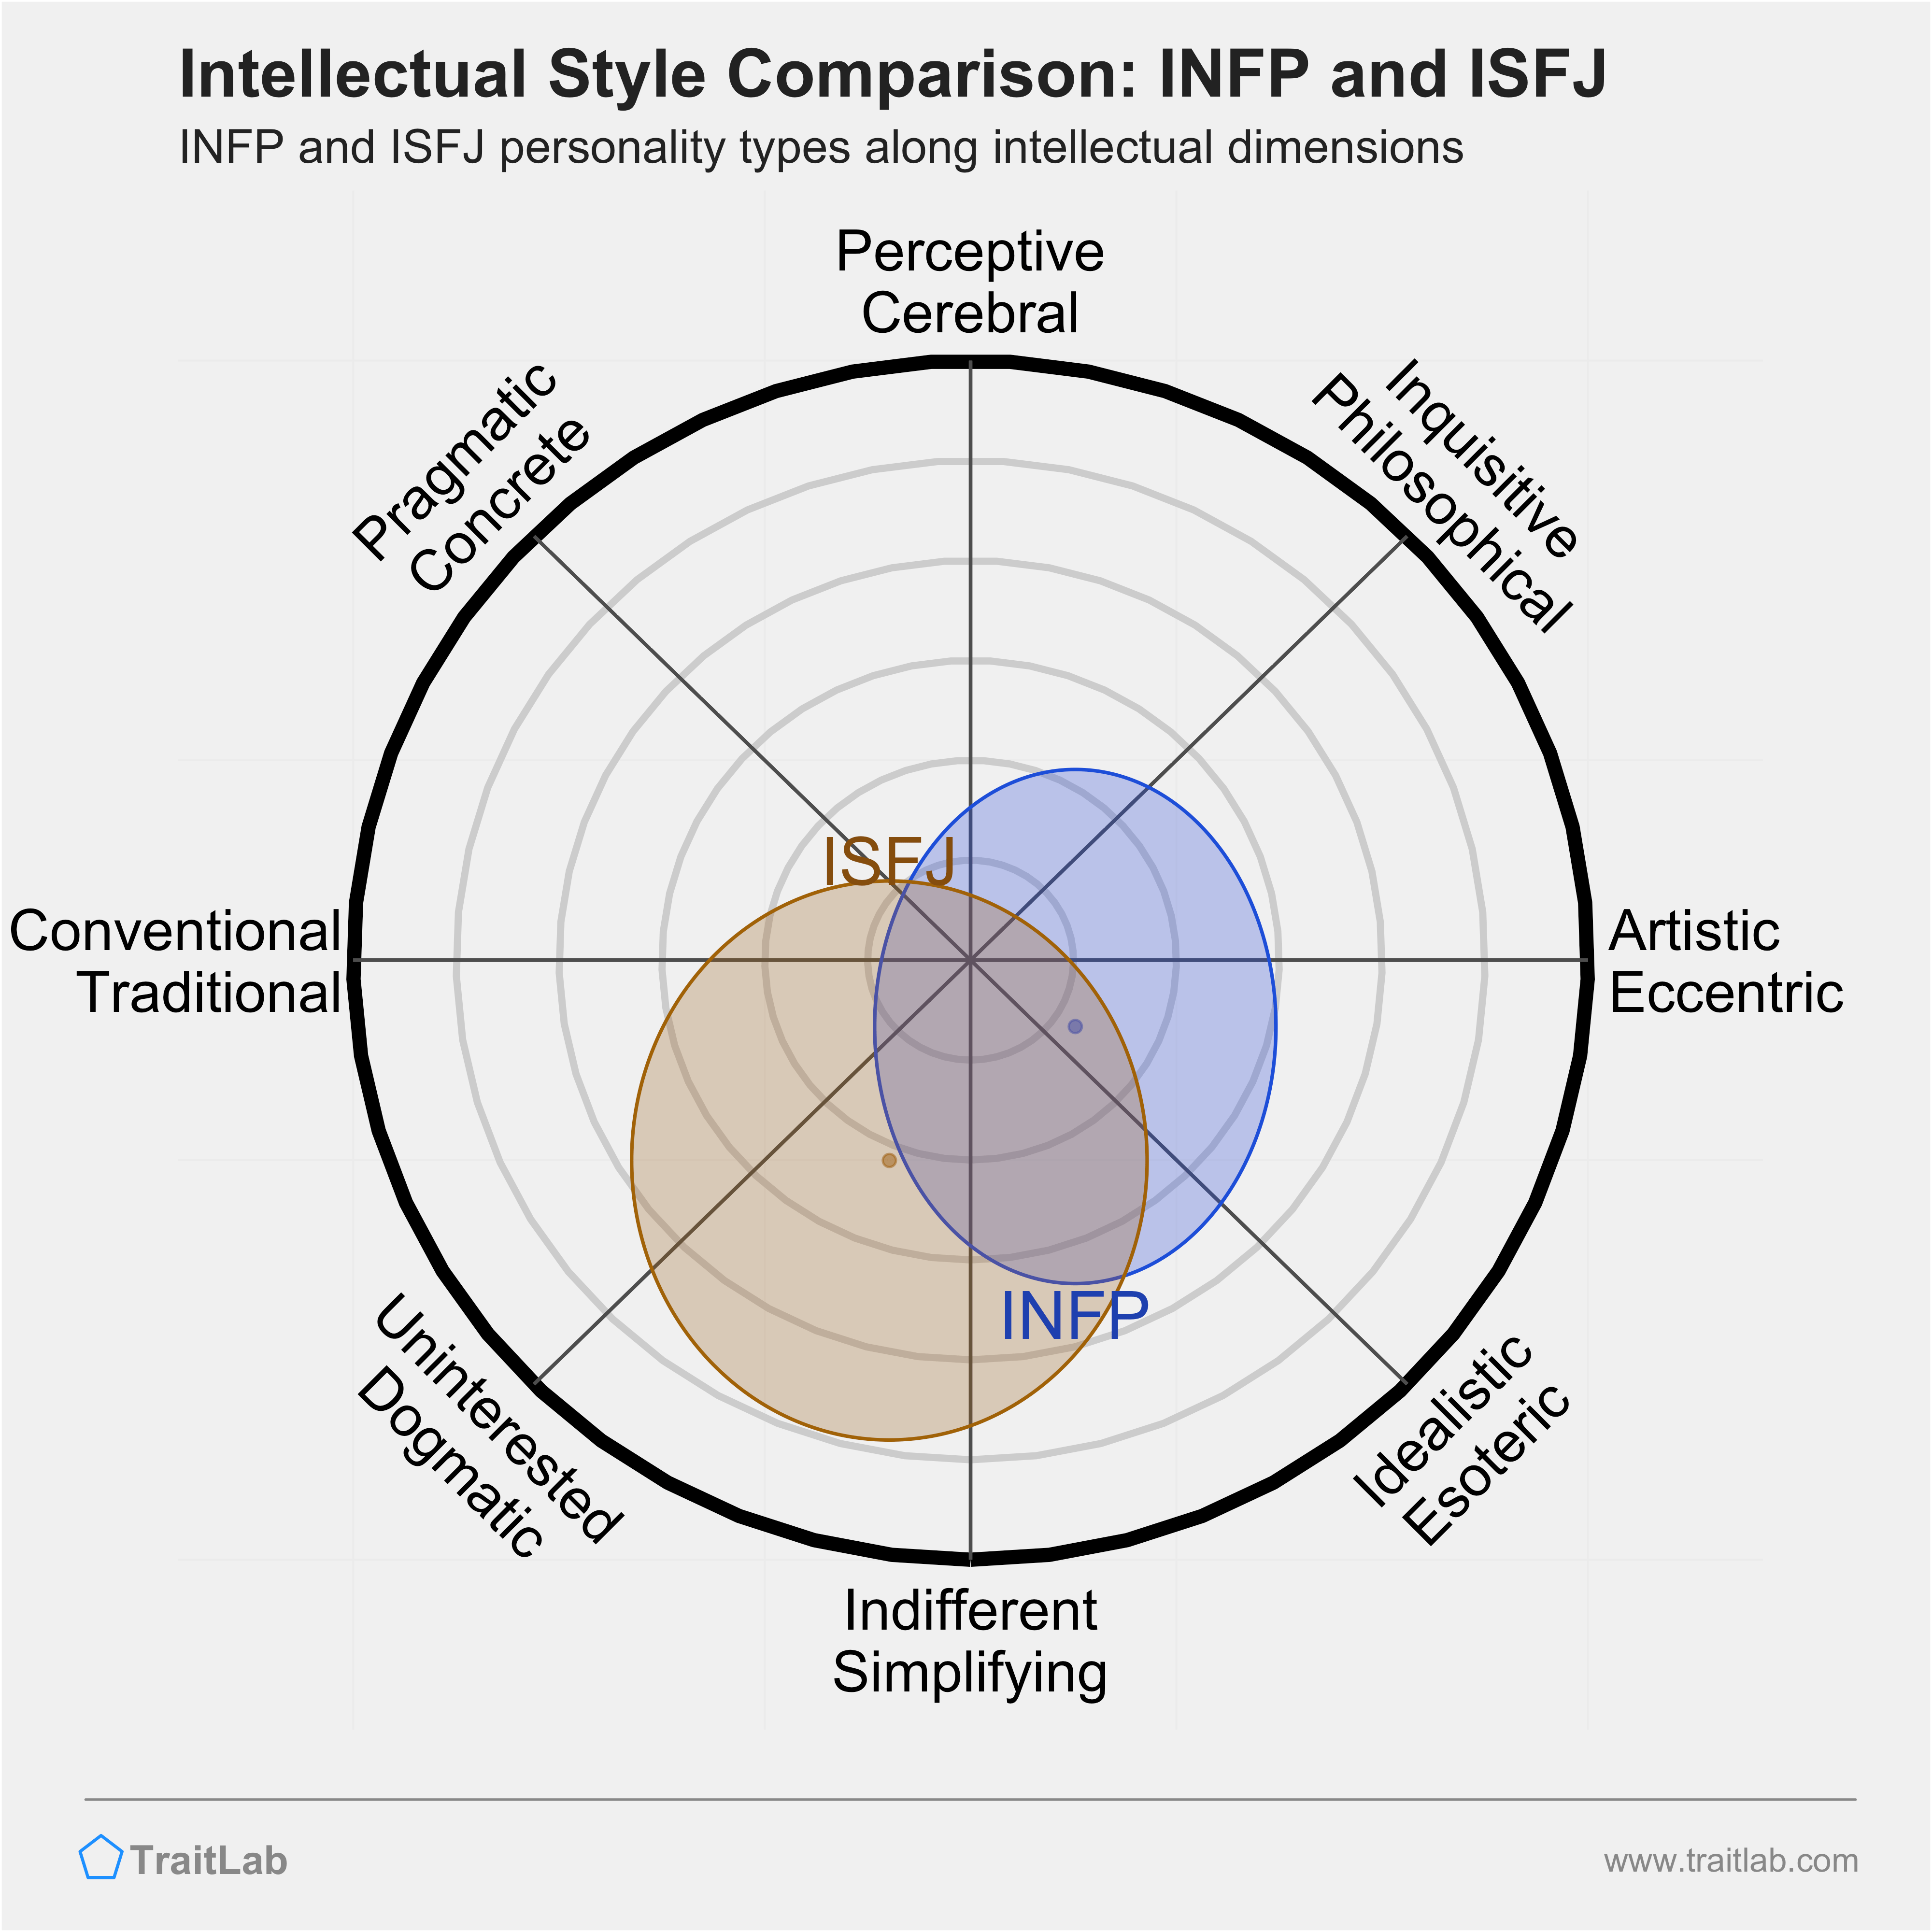 INFP and ISFJ comparison across intellectual dimensions